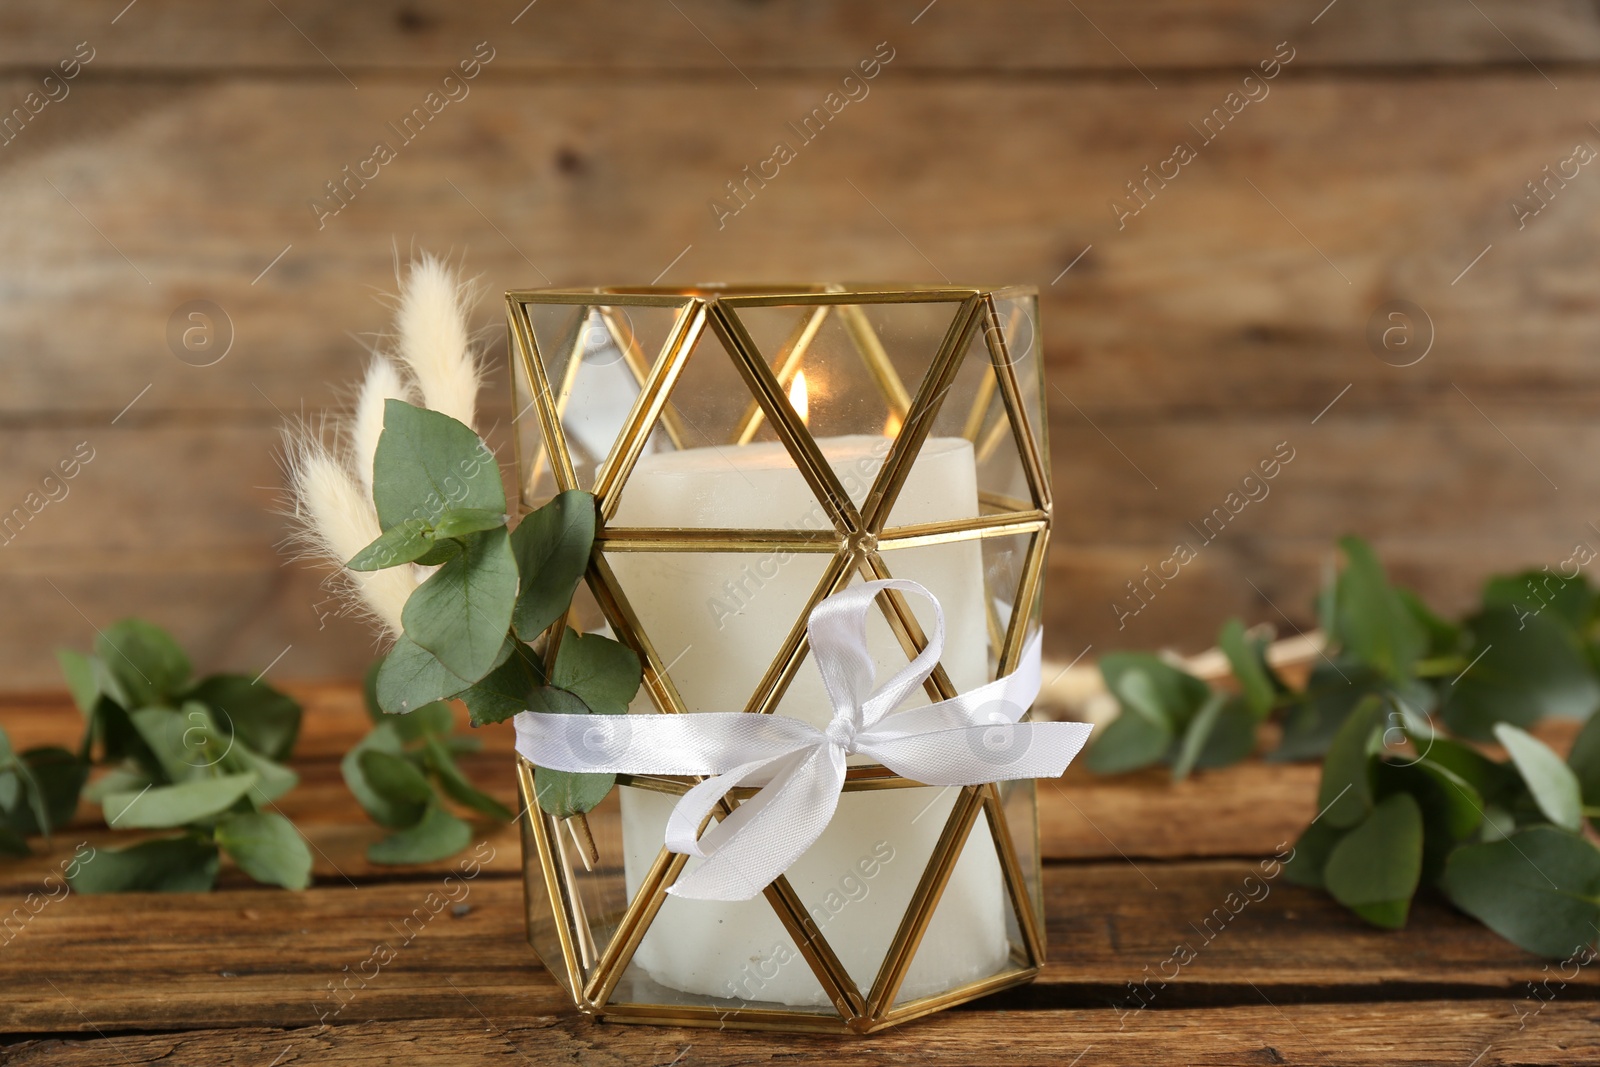 Photo of Stylish glass holder with burning candle and floral decor on wooden table